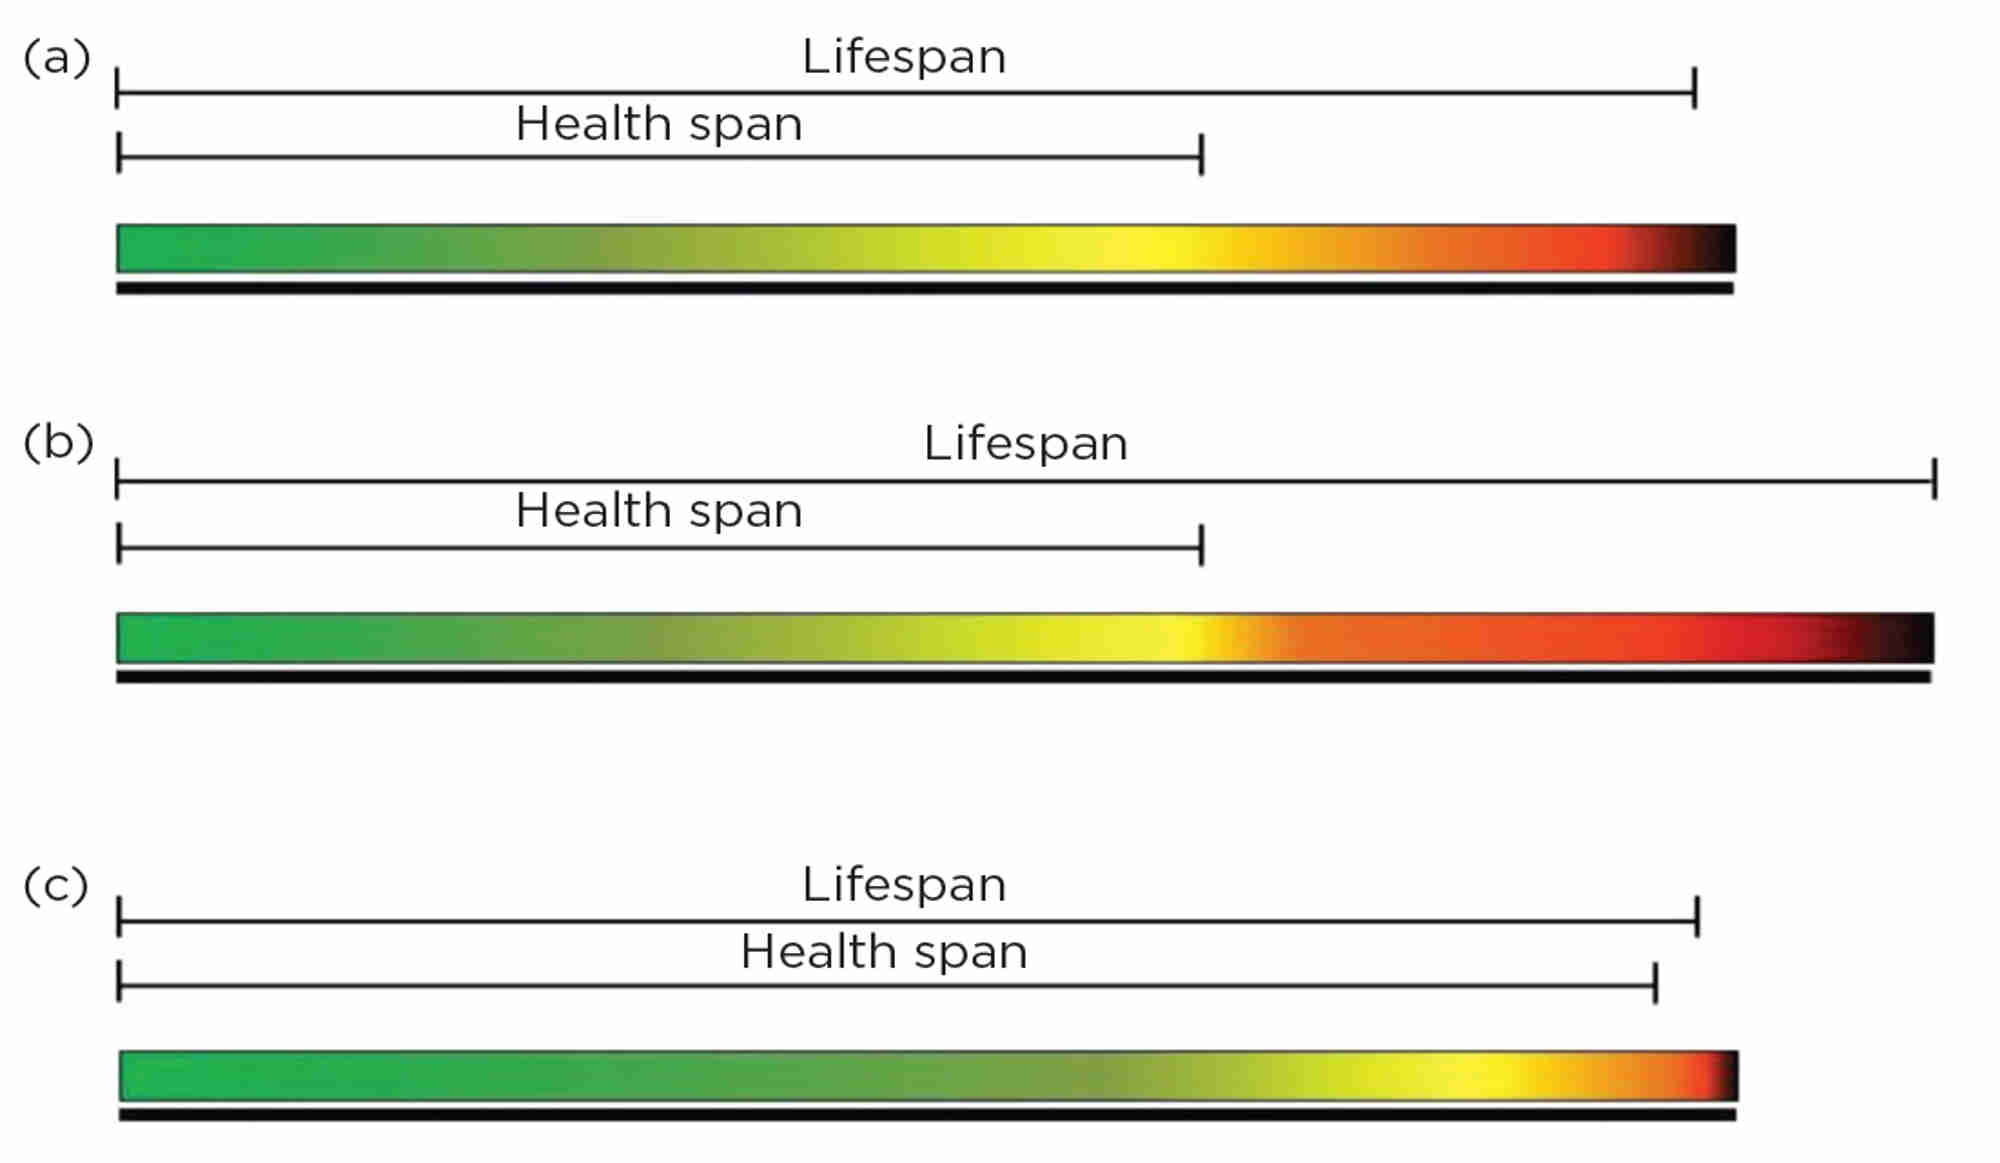 Figure 1. Differing approaches to treating populations of increasing age. Colours represent the relative health of an individual (green = good health ranging to dark brown = poor health). (a) The normal lifespan of an average person with reported years of poor health and disability. (b) A medical focus on lifespan extension only. (c) A medical focus on extension of health span only.10